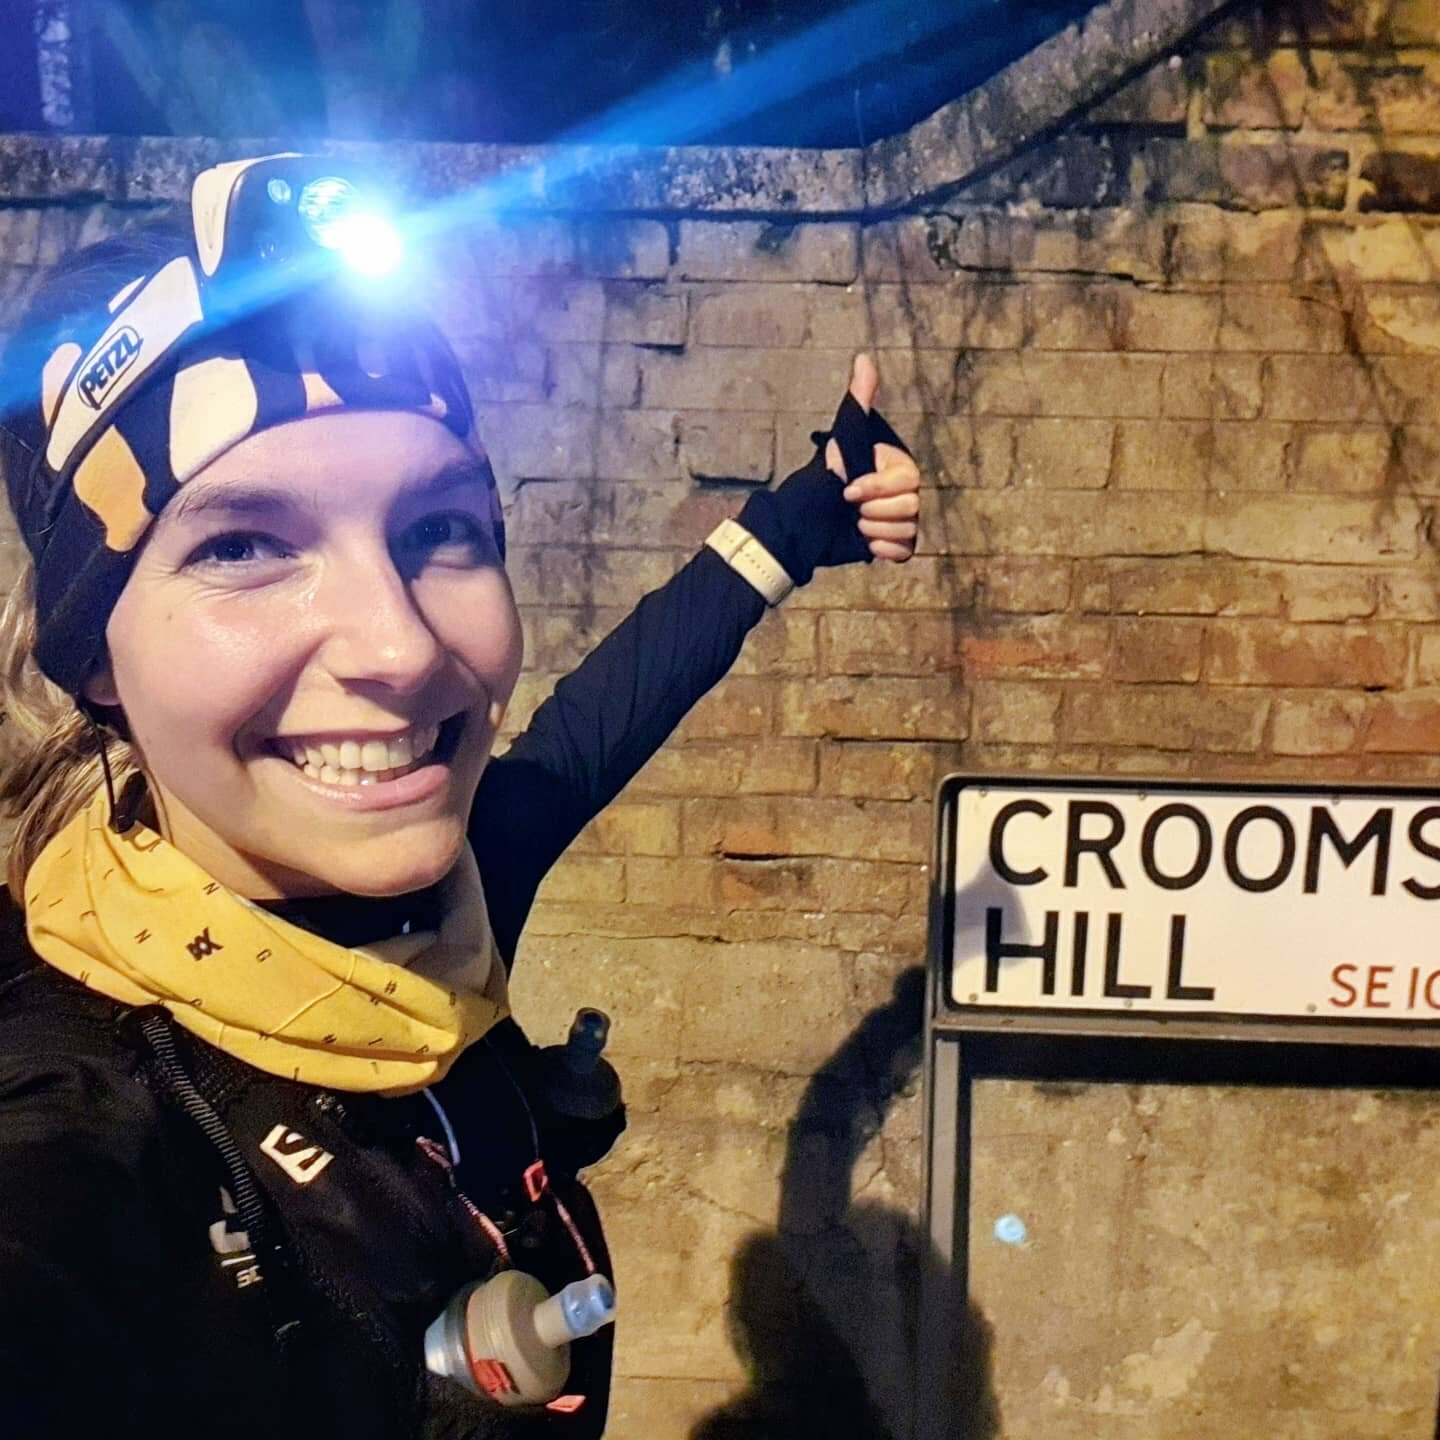 Arc training in full shwiiiing! 14 long hill reps in the cold and dark.. It's tough getting out in these conditions sometimes, and the later you leave it, the harder it gets because then you think arghh if I had just gone out when I originally planne